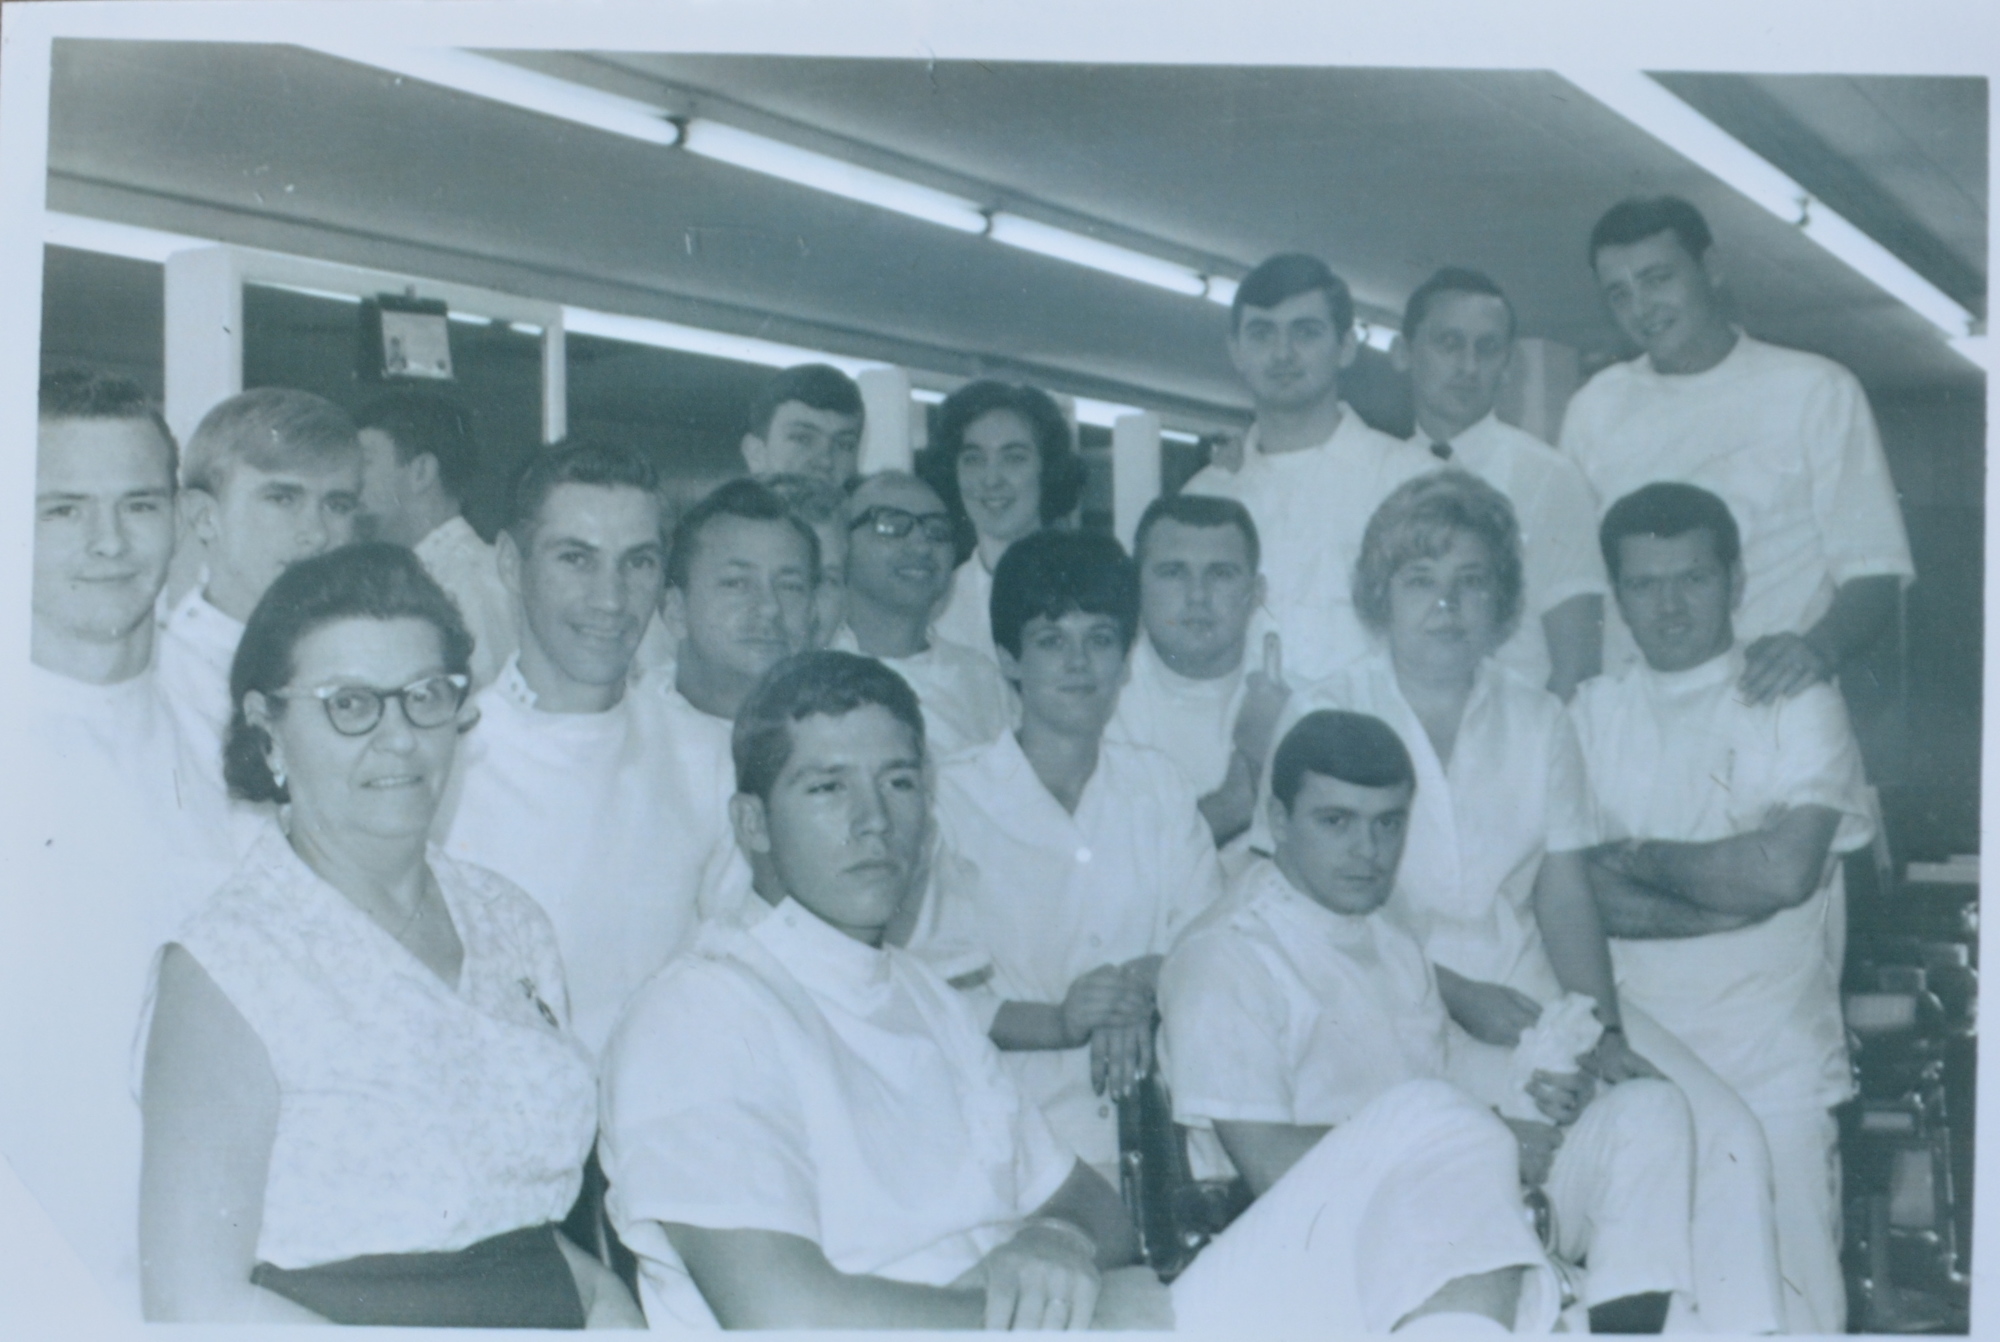 Larry Herrington, middle row far right, graduated from barbershop college in 1967 after nine months of instruction.